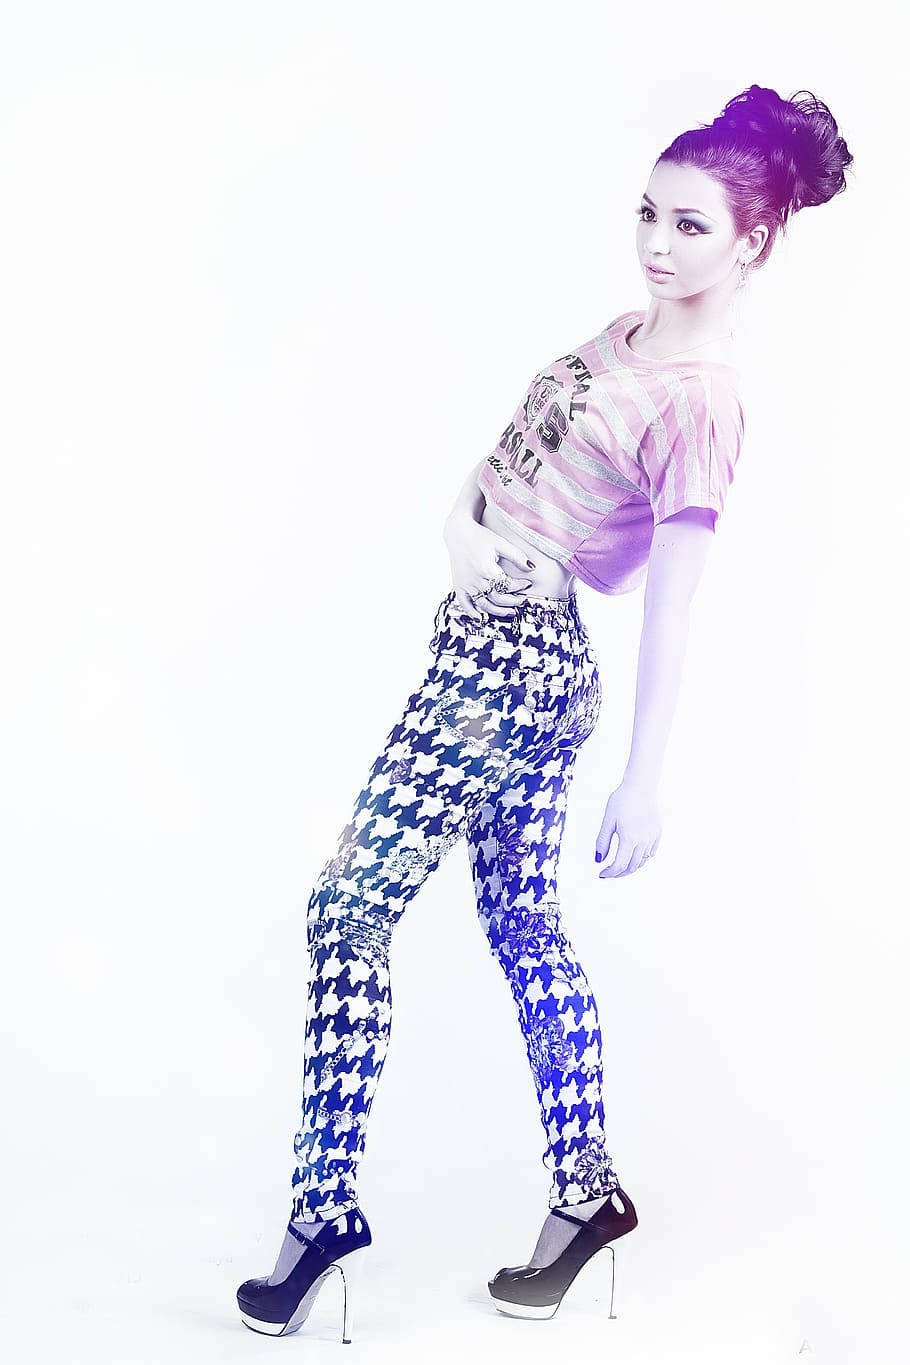 woman, wearing, pink, gray, striped, crop, top, black, white, houndstooth pants